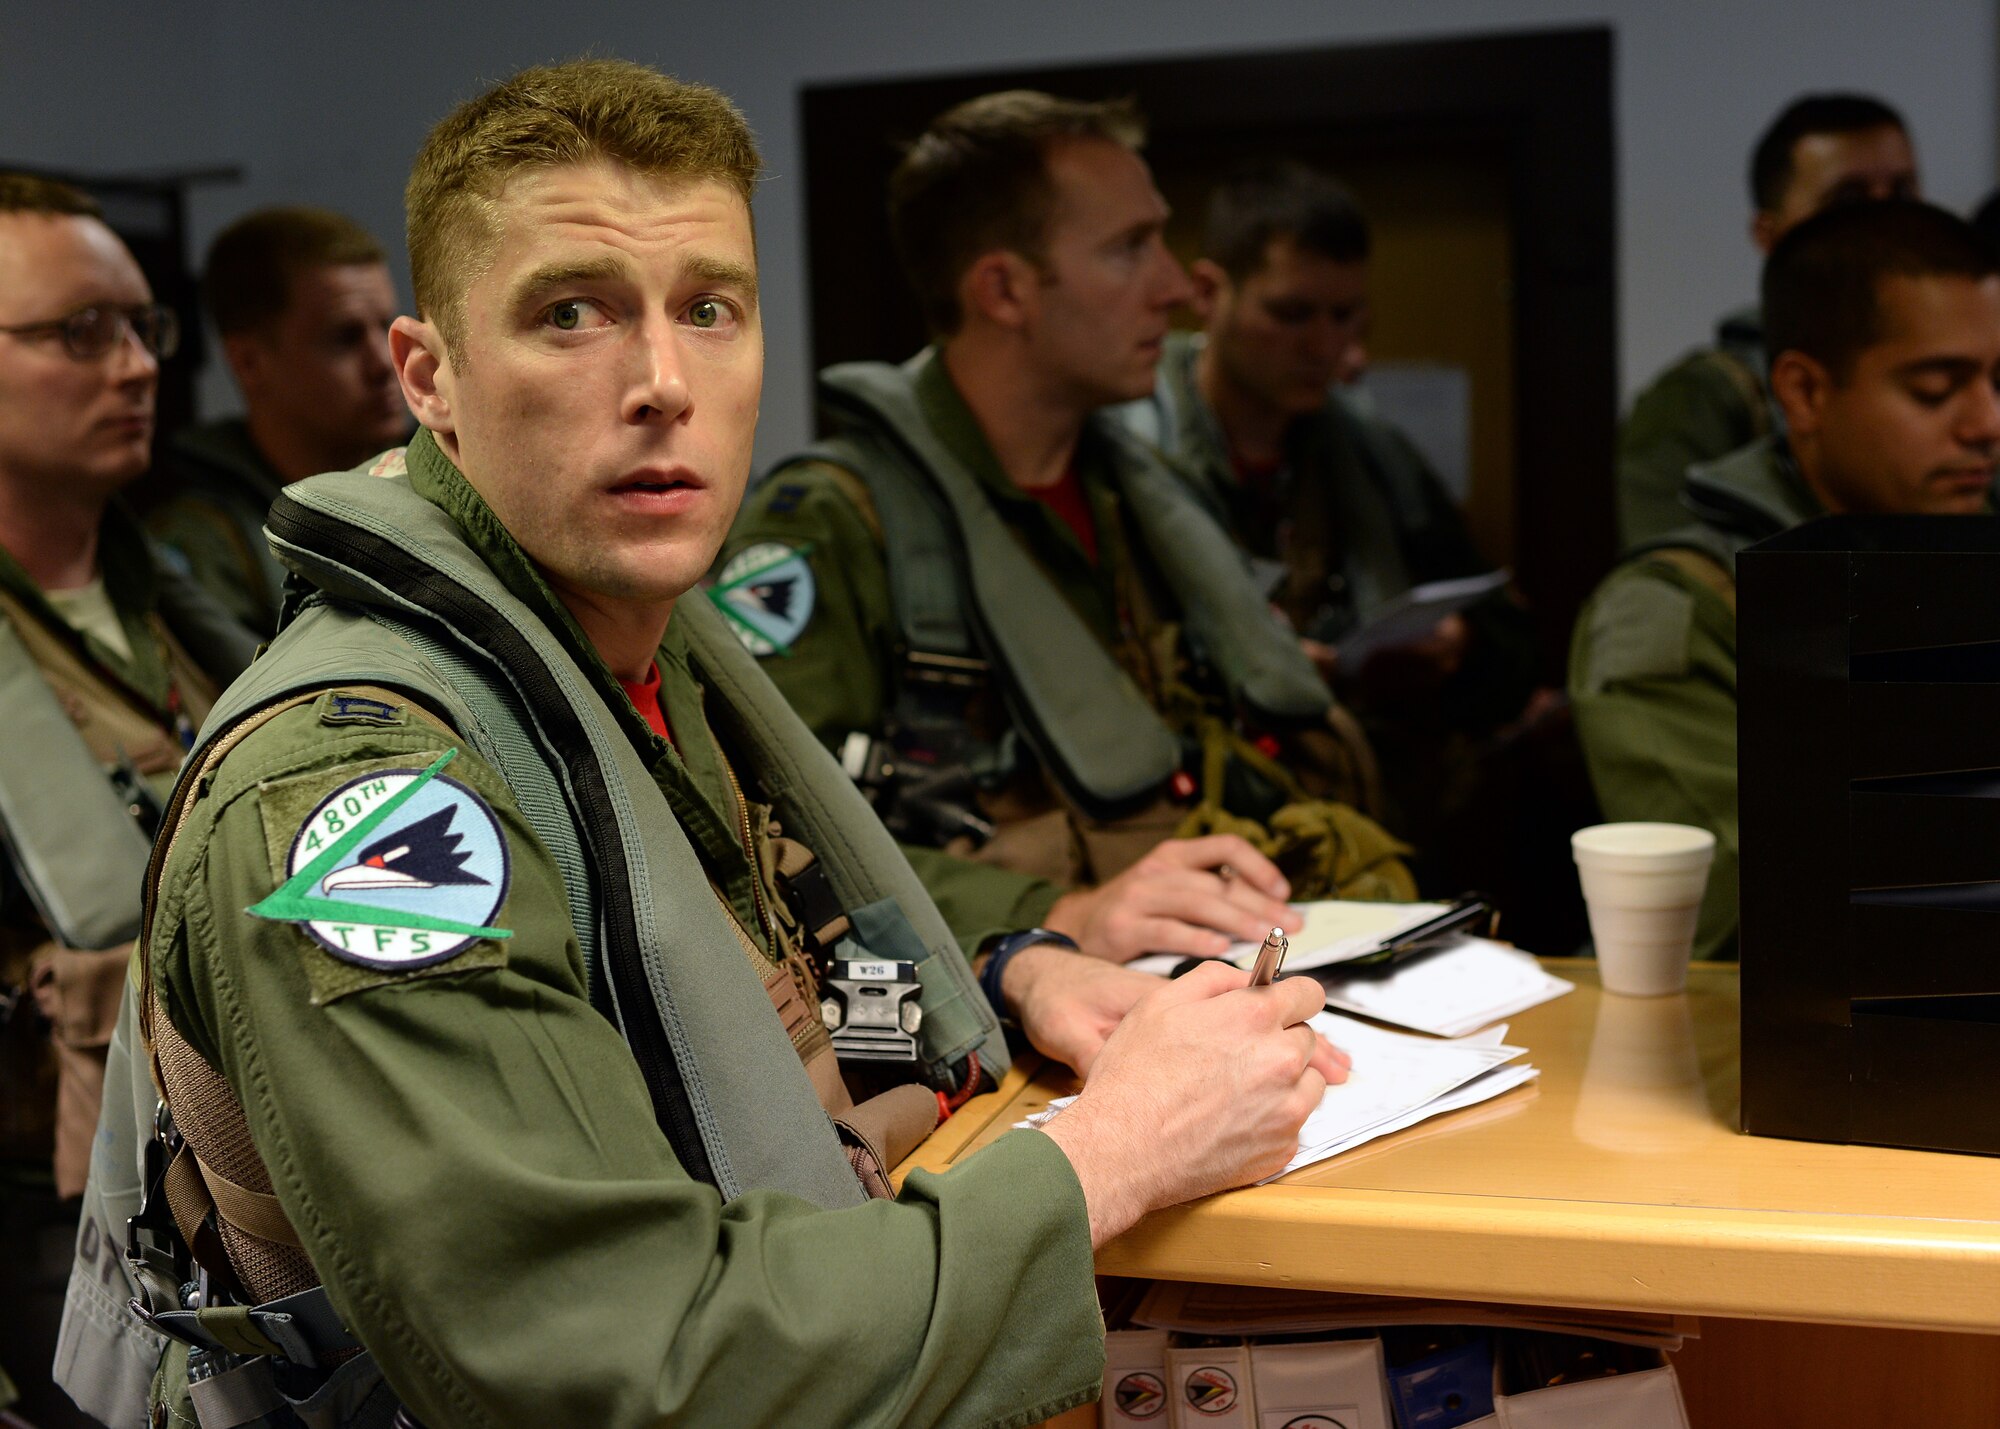 A U.S. Air Force F-16 Fighting Falcon fighter aircraft pilot from the 480th Fighter Squadron at Spangdahlem Air Base, Germany, reviews his flight information before departing for Souda Bay, Greece, for a training event between the U.S. and Hellenic air forces Aug. 11-23. The goal of the training event is to strengthen the ties between the two nations and increase their NATO military capability. (U.S. Air Force photo by Staff Sgt. Daryl Knee/Released)